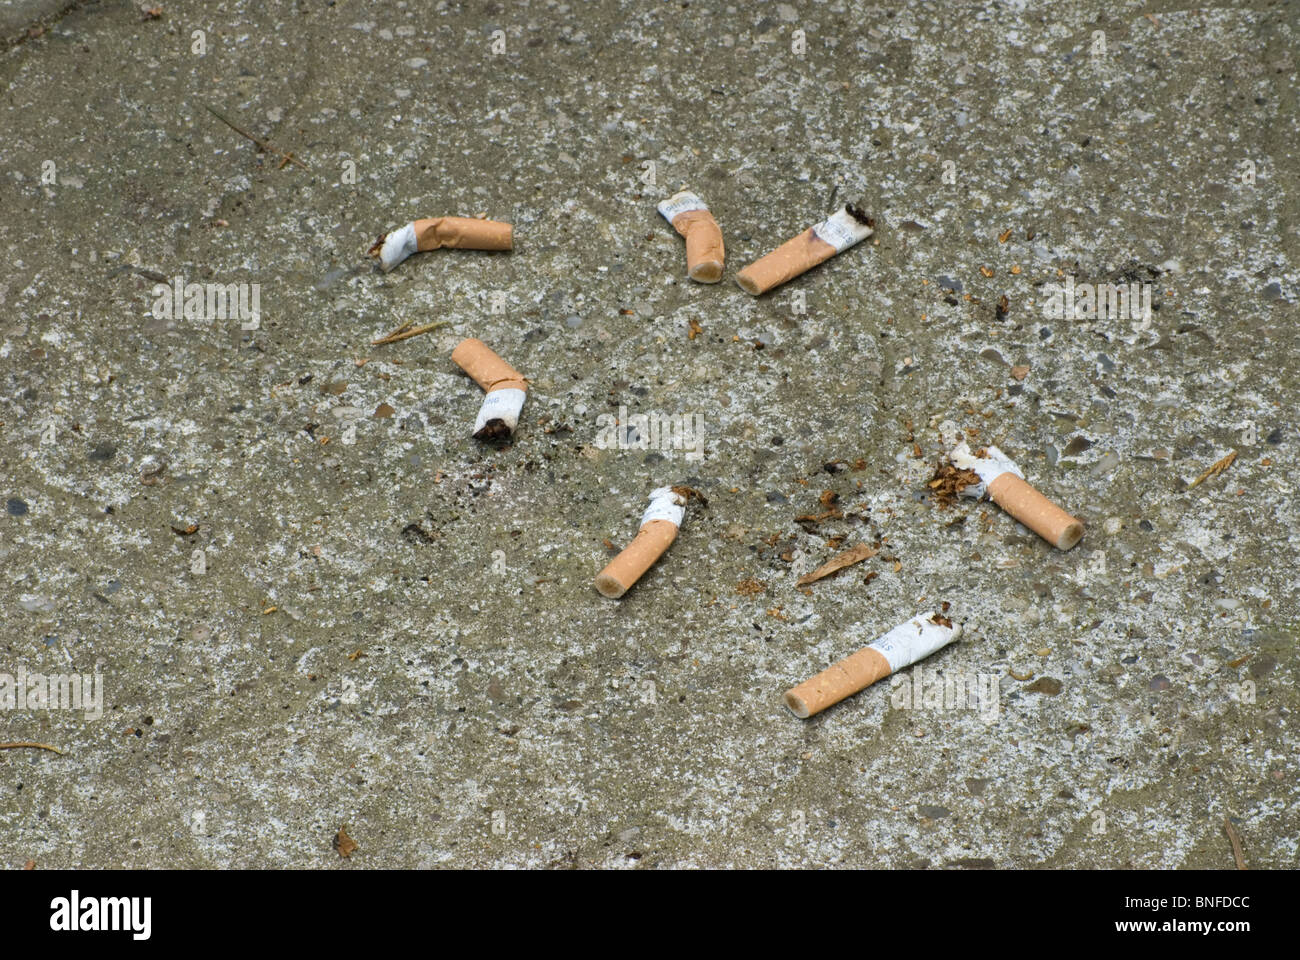 Picking Up Litter - Cigarette Ends Stock Photo